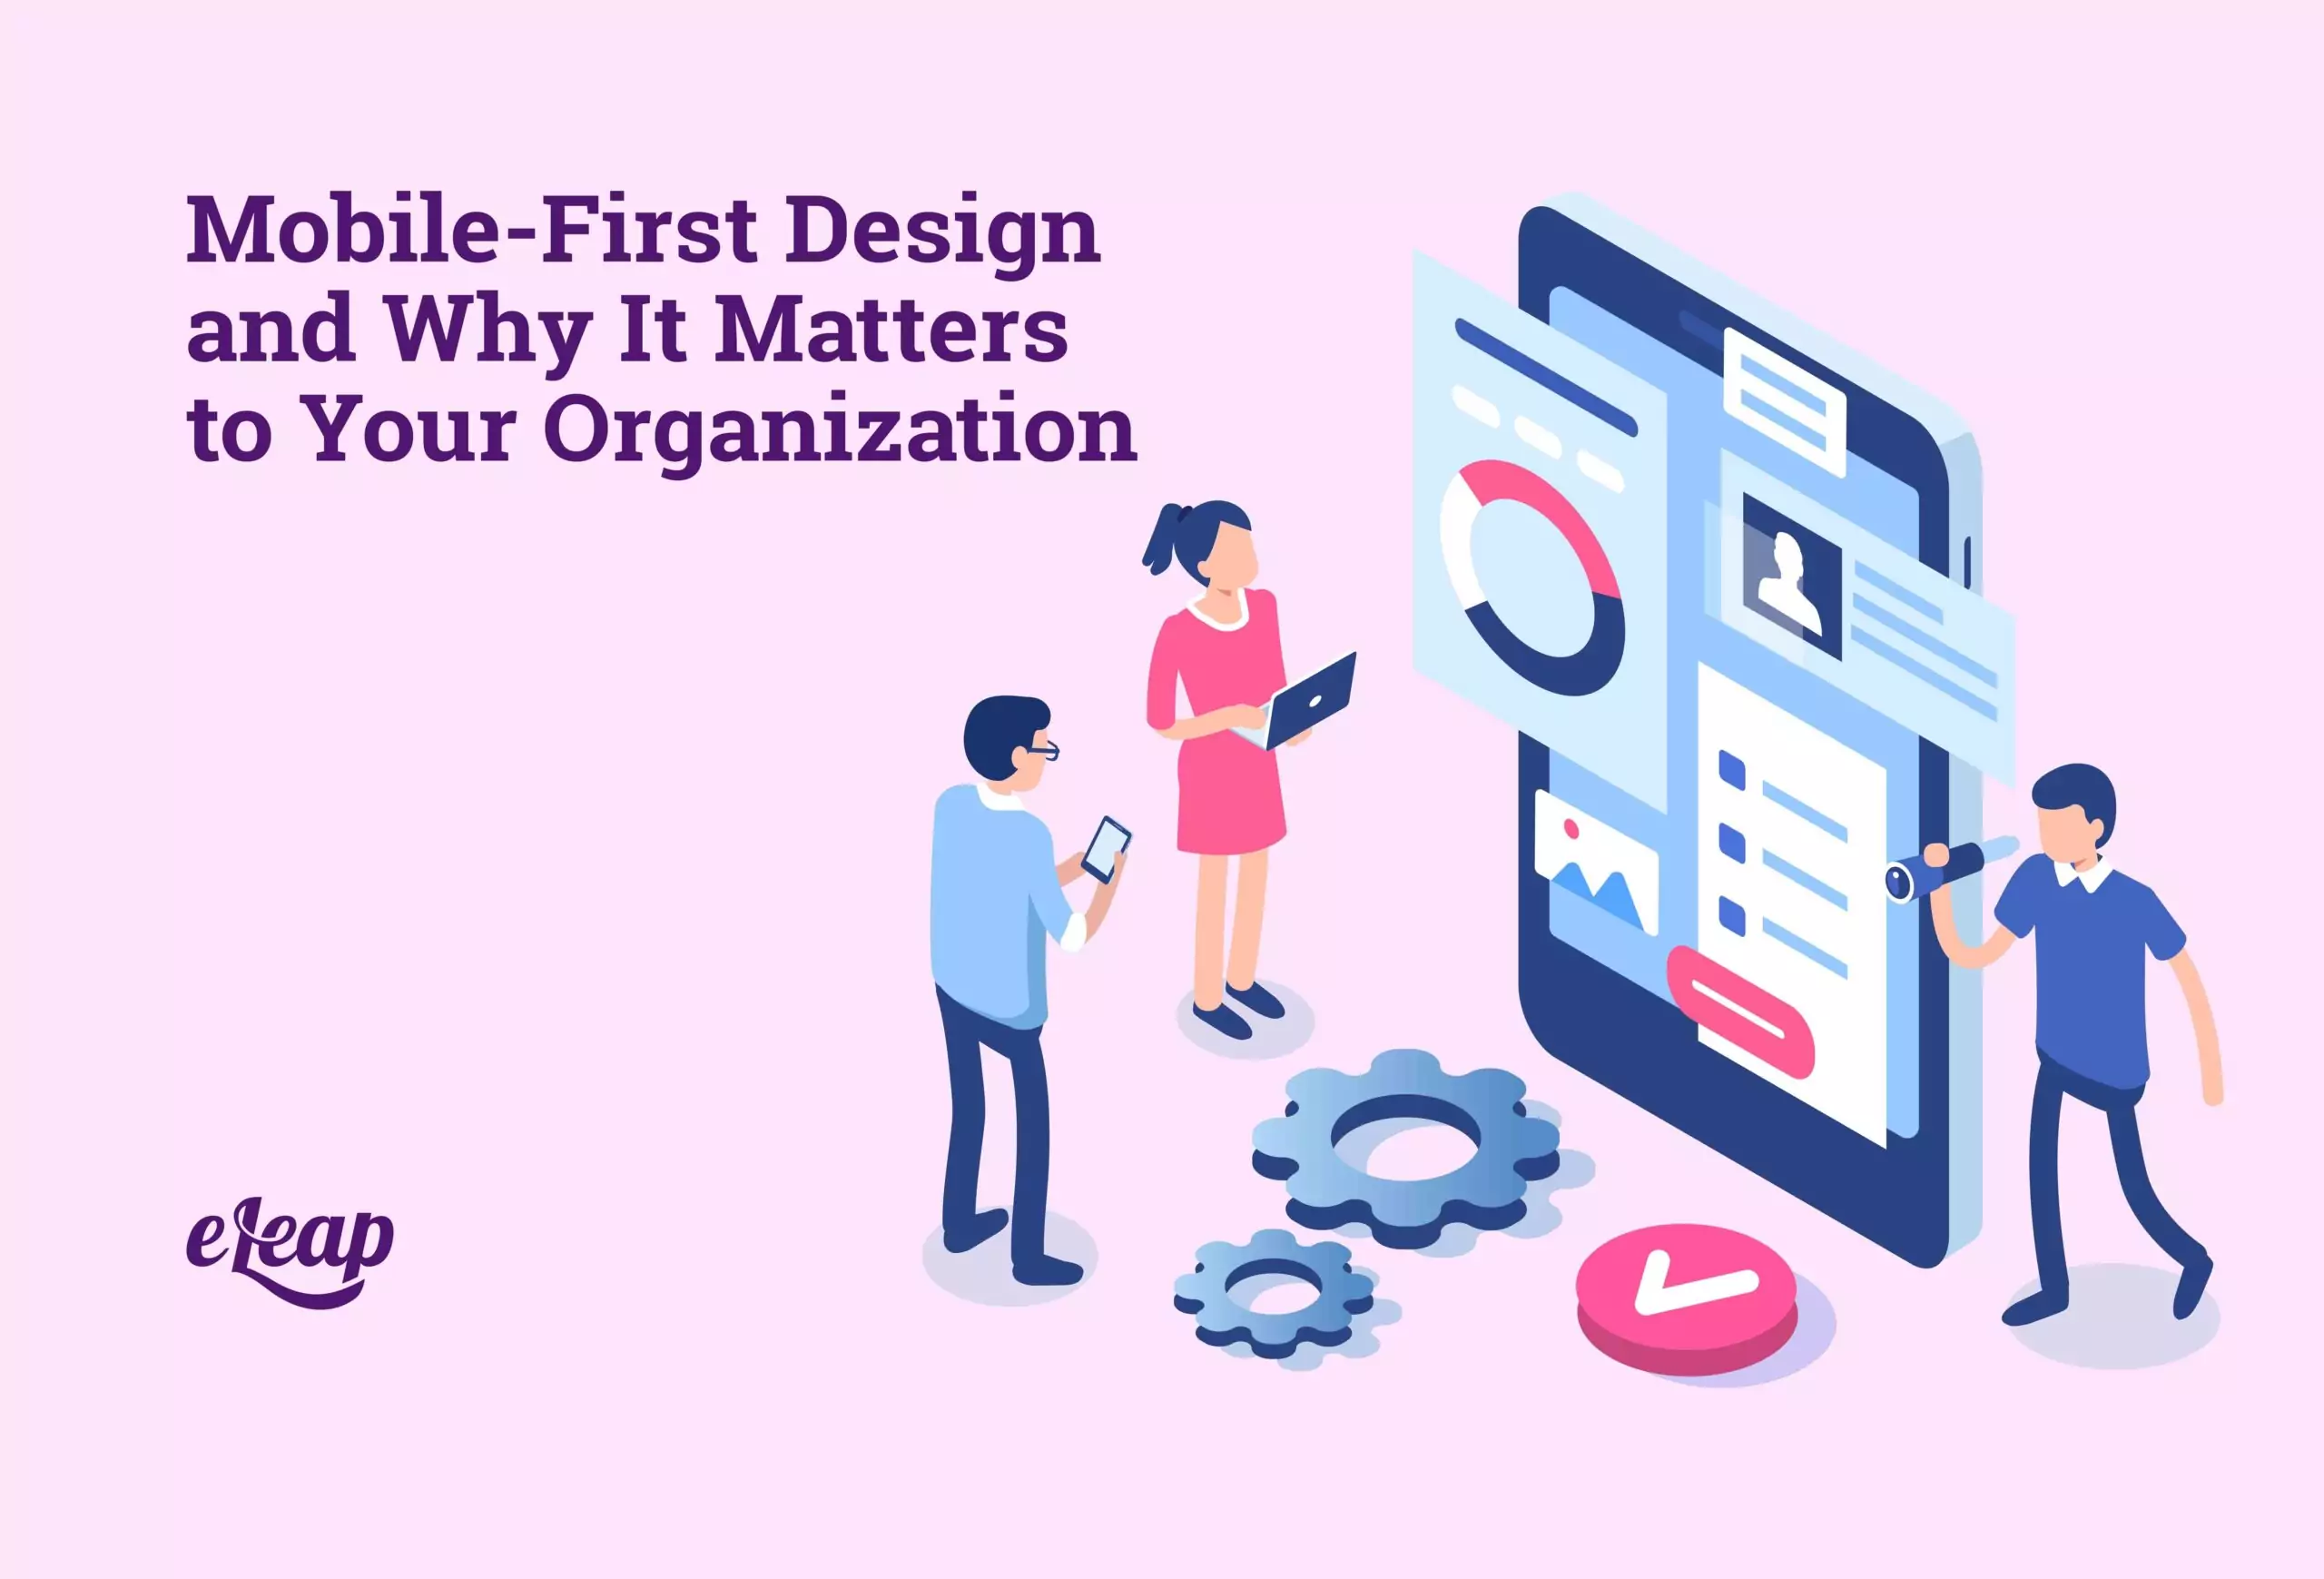 Mobile-First Design and Why It Matters to Your Organization